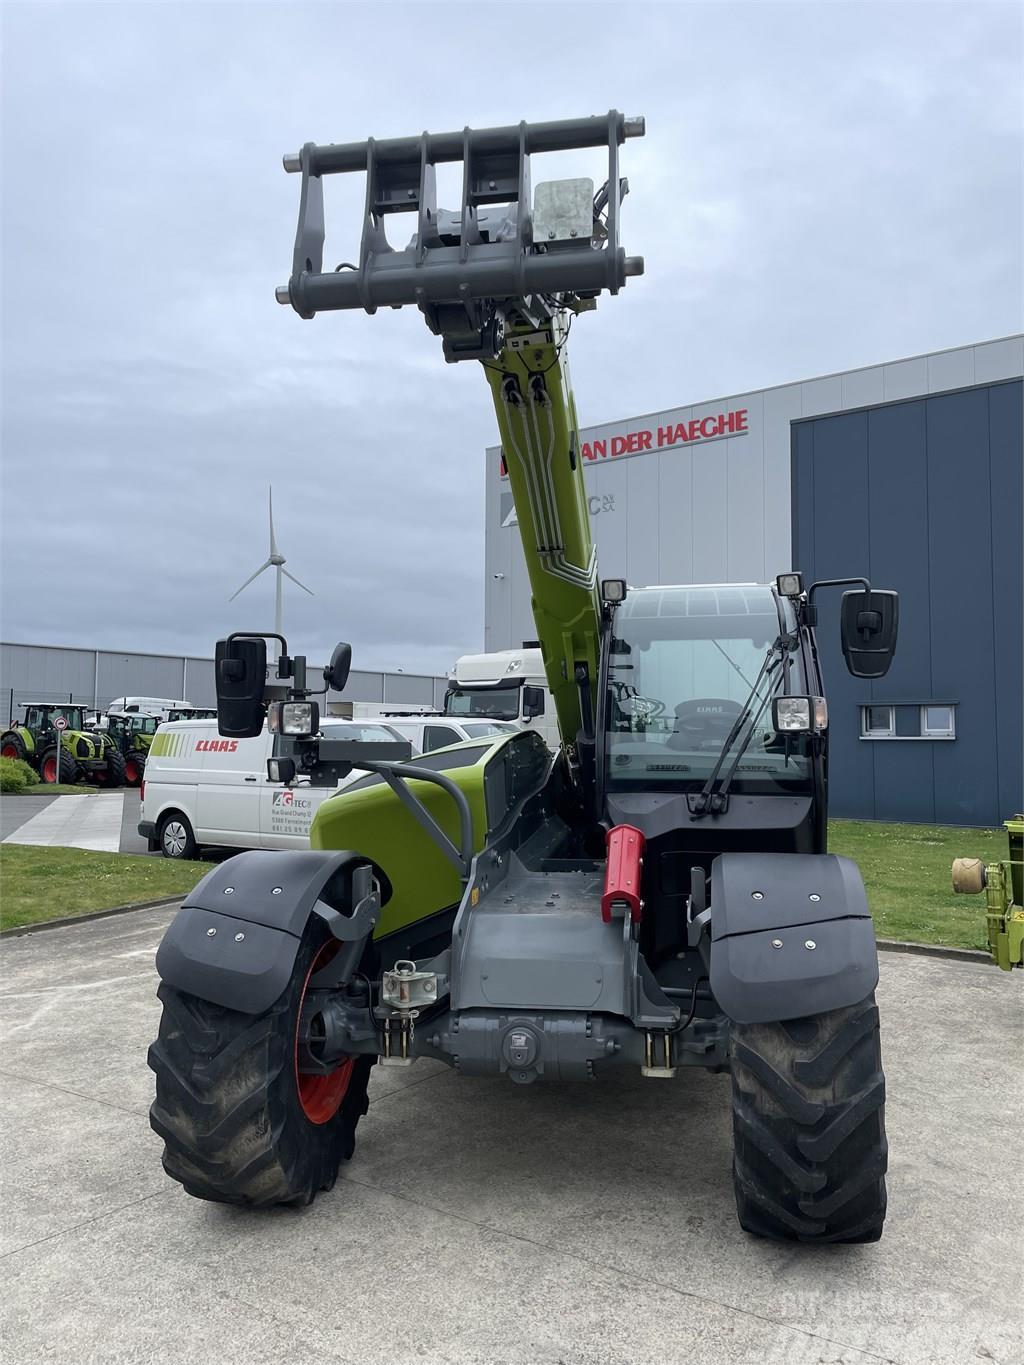 CLAAS Scorpion 732 Telehandlers for agriculture